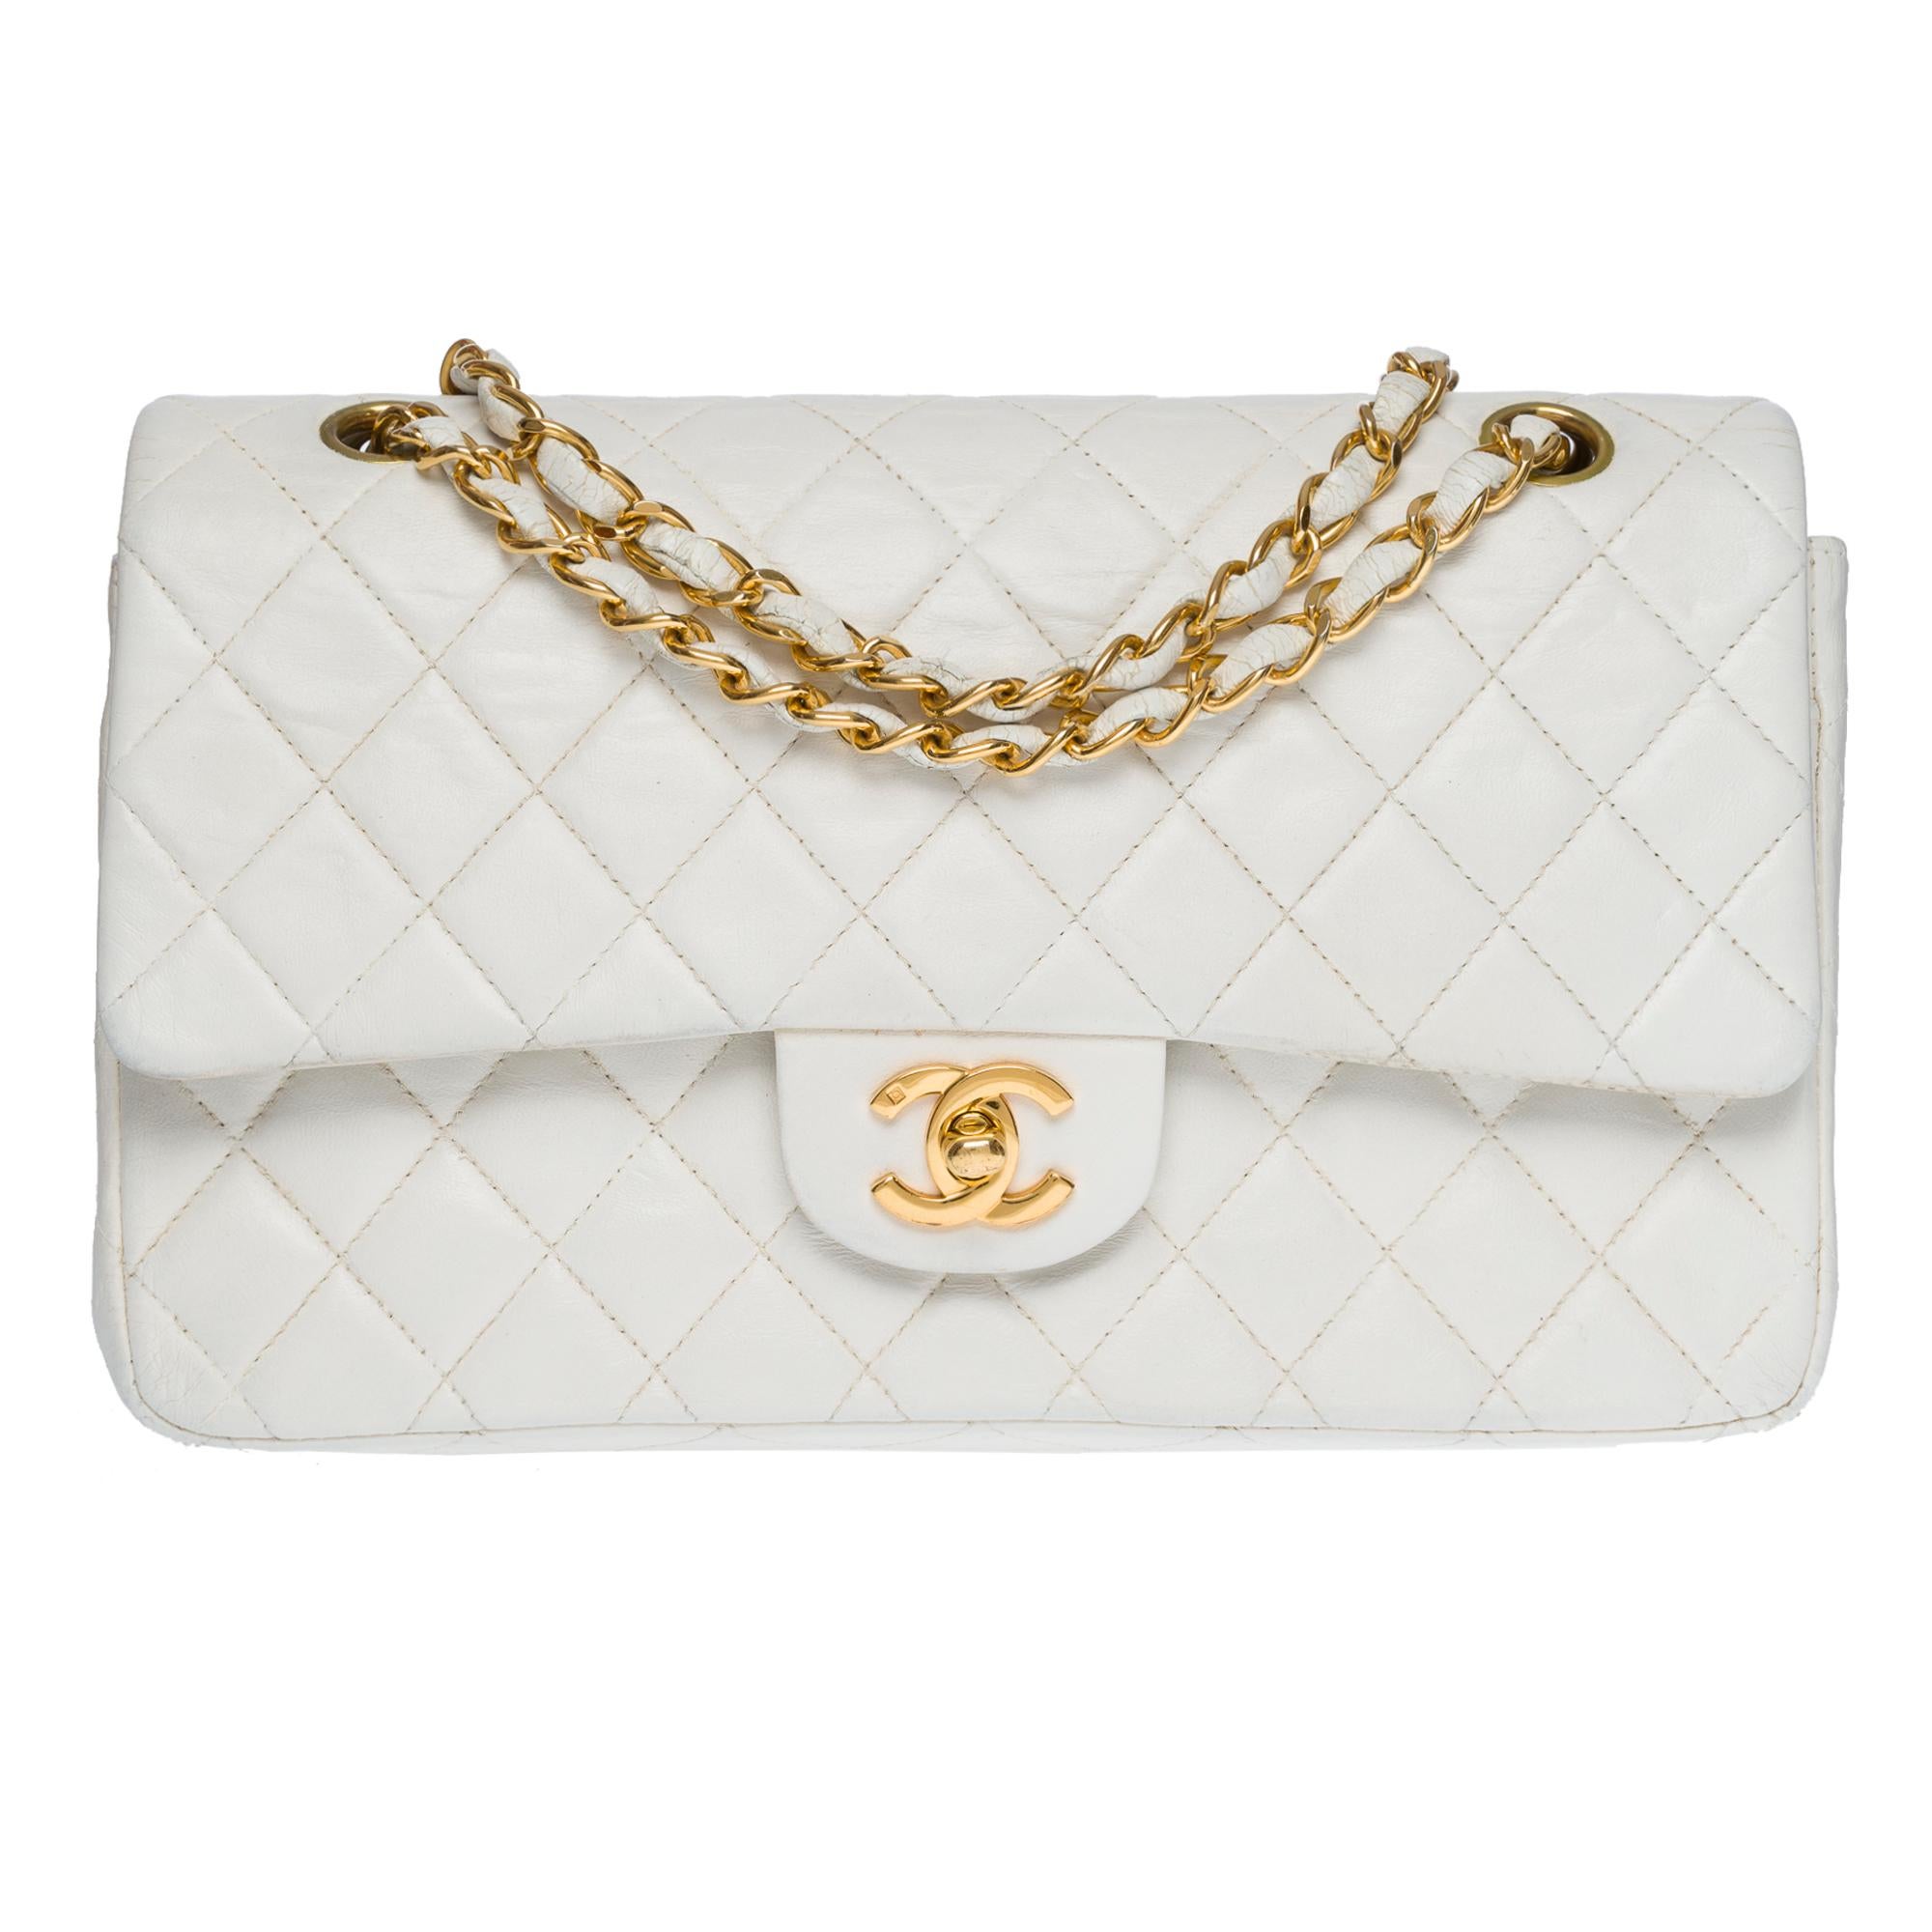 Chanel Timeless Medium 25 cm double flap shoulder bag in white quilted lambskin, gold-plated metal hardware, a gold-plated metal chain handle interwoven with white leather for a hand or shoulder support

Gold metal flap closure
Patch pocket on back